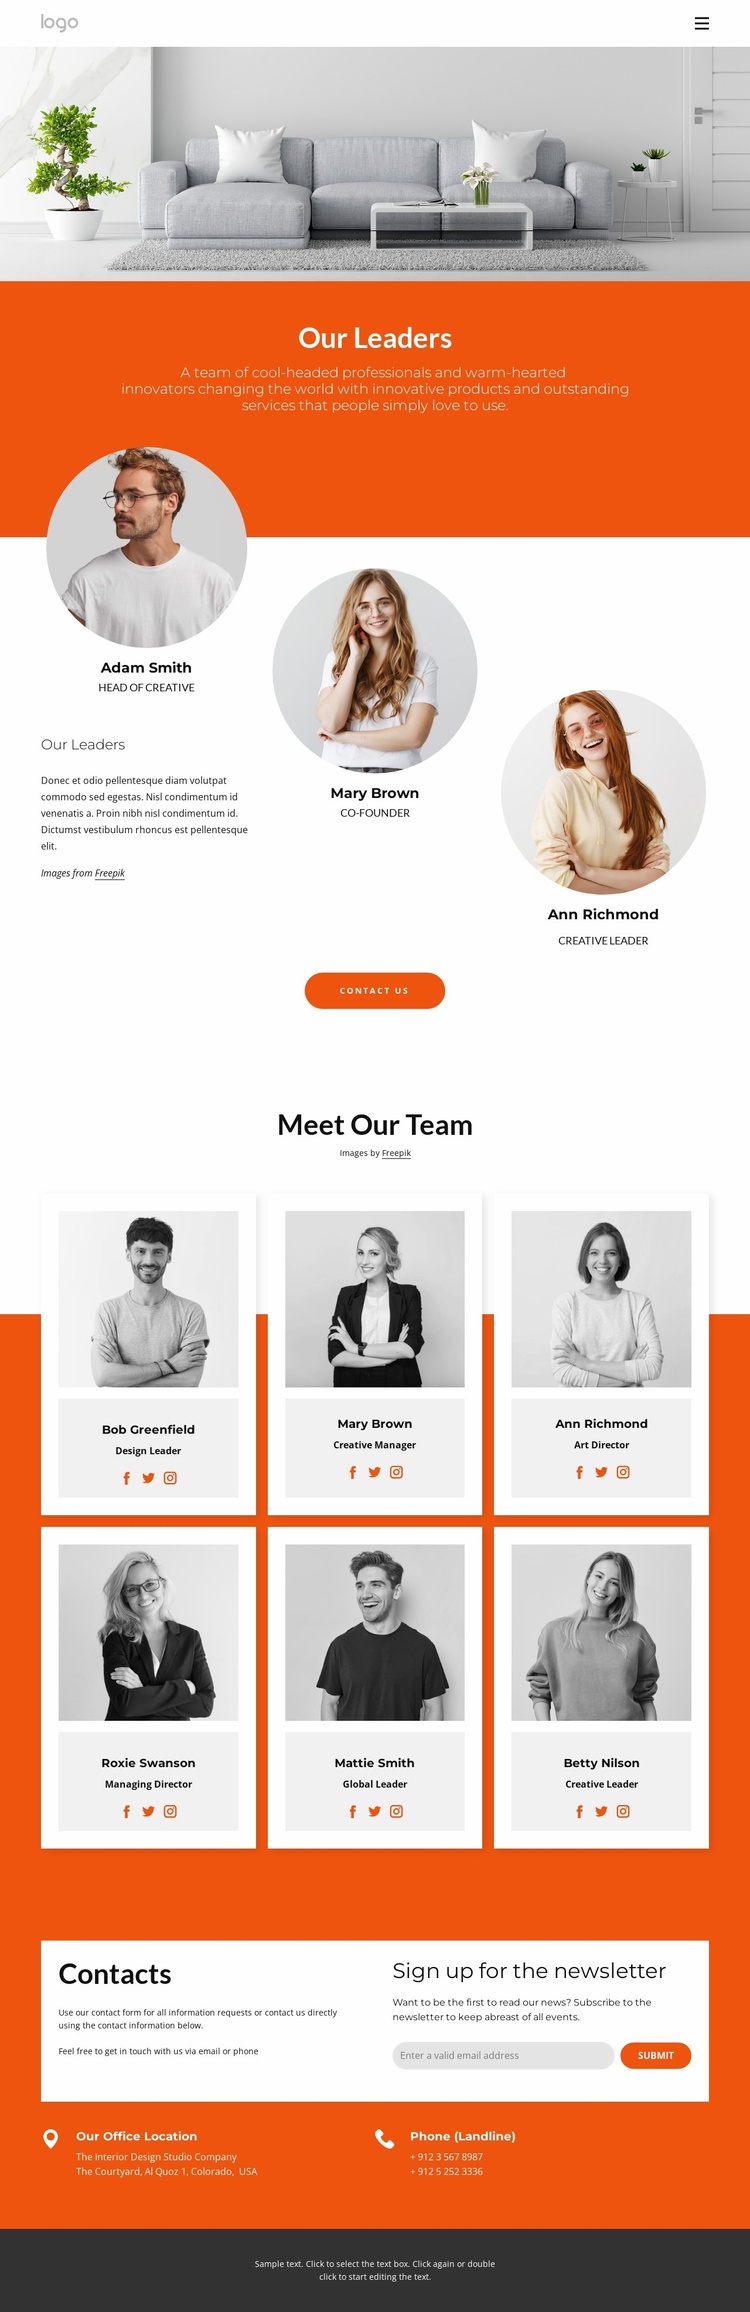 Our great team Website Template